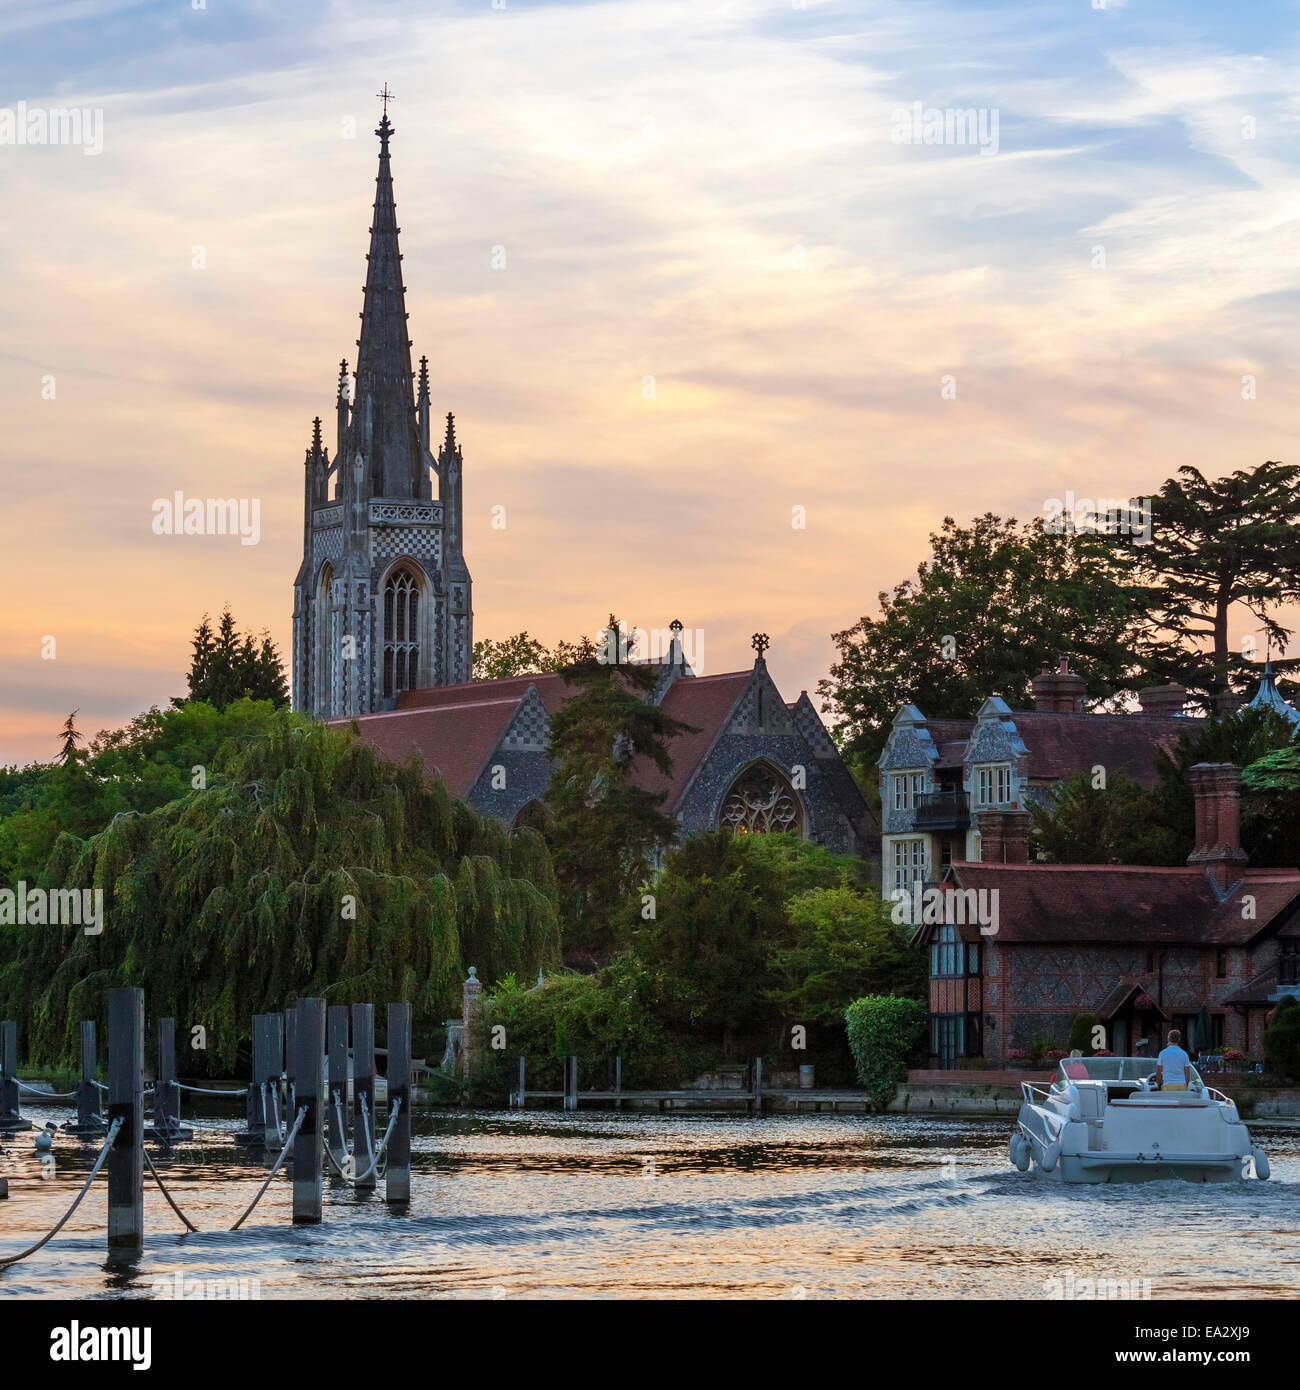 Man and woman on boat with All Saints Church in the background, Marlow, Buckinghamshire, England, United Kingdom, Europe Stock Photo